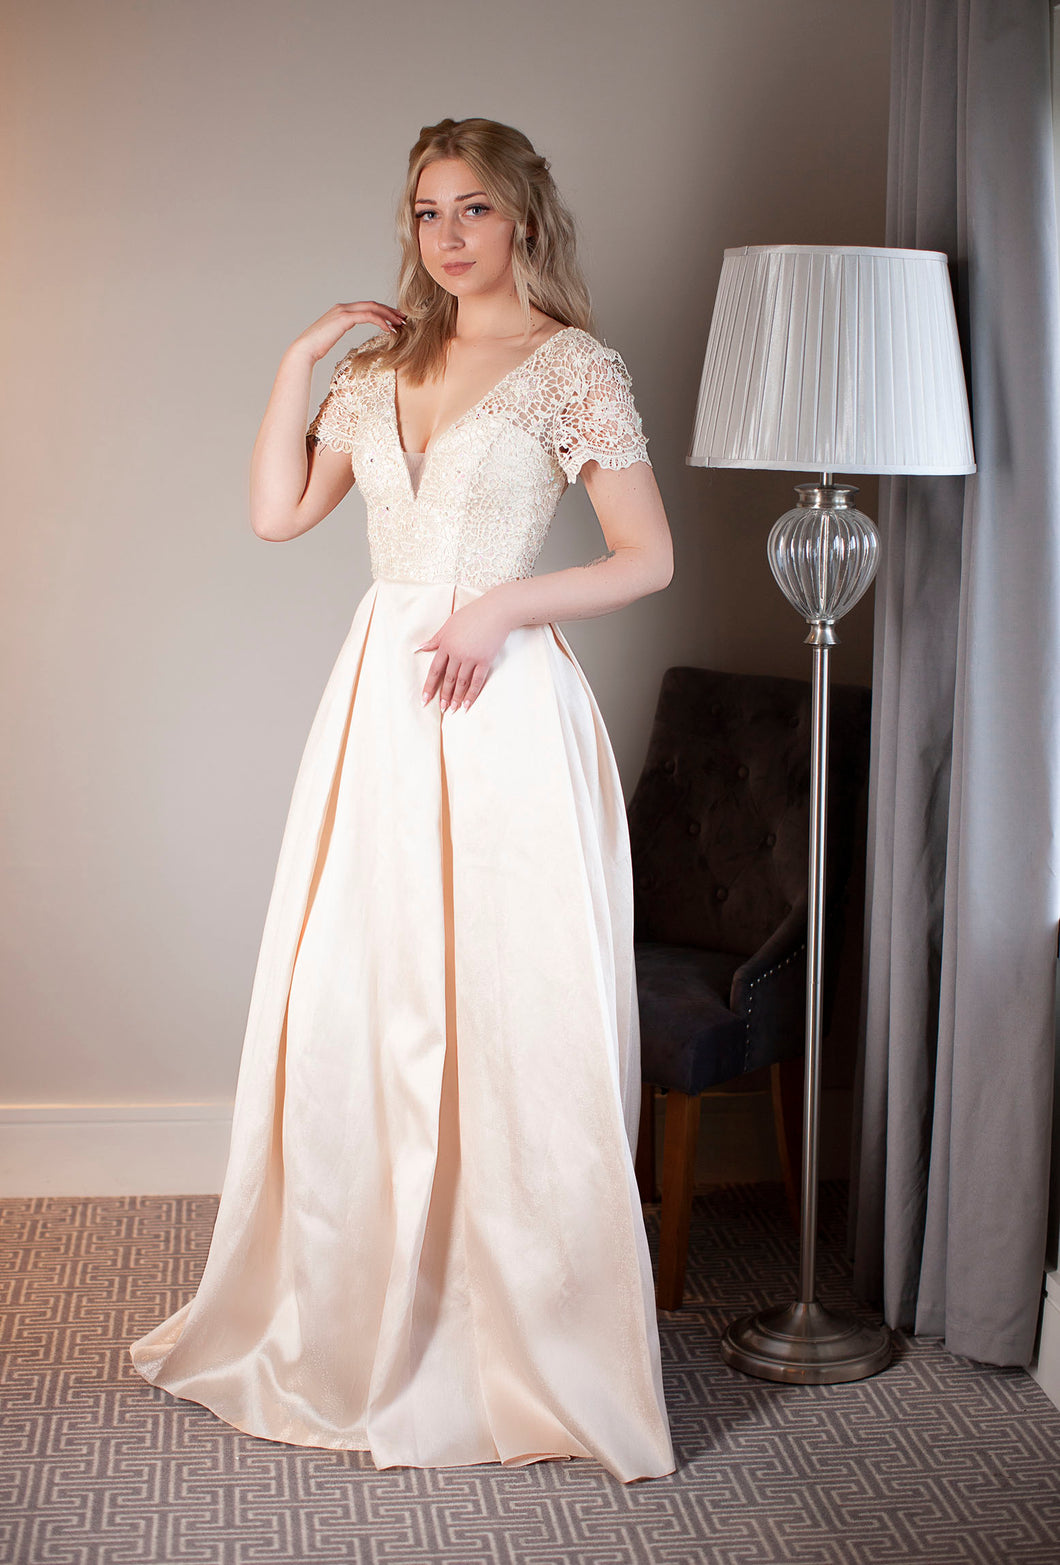 Champagne ball gown dresses